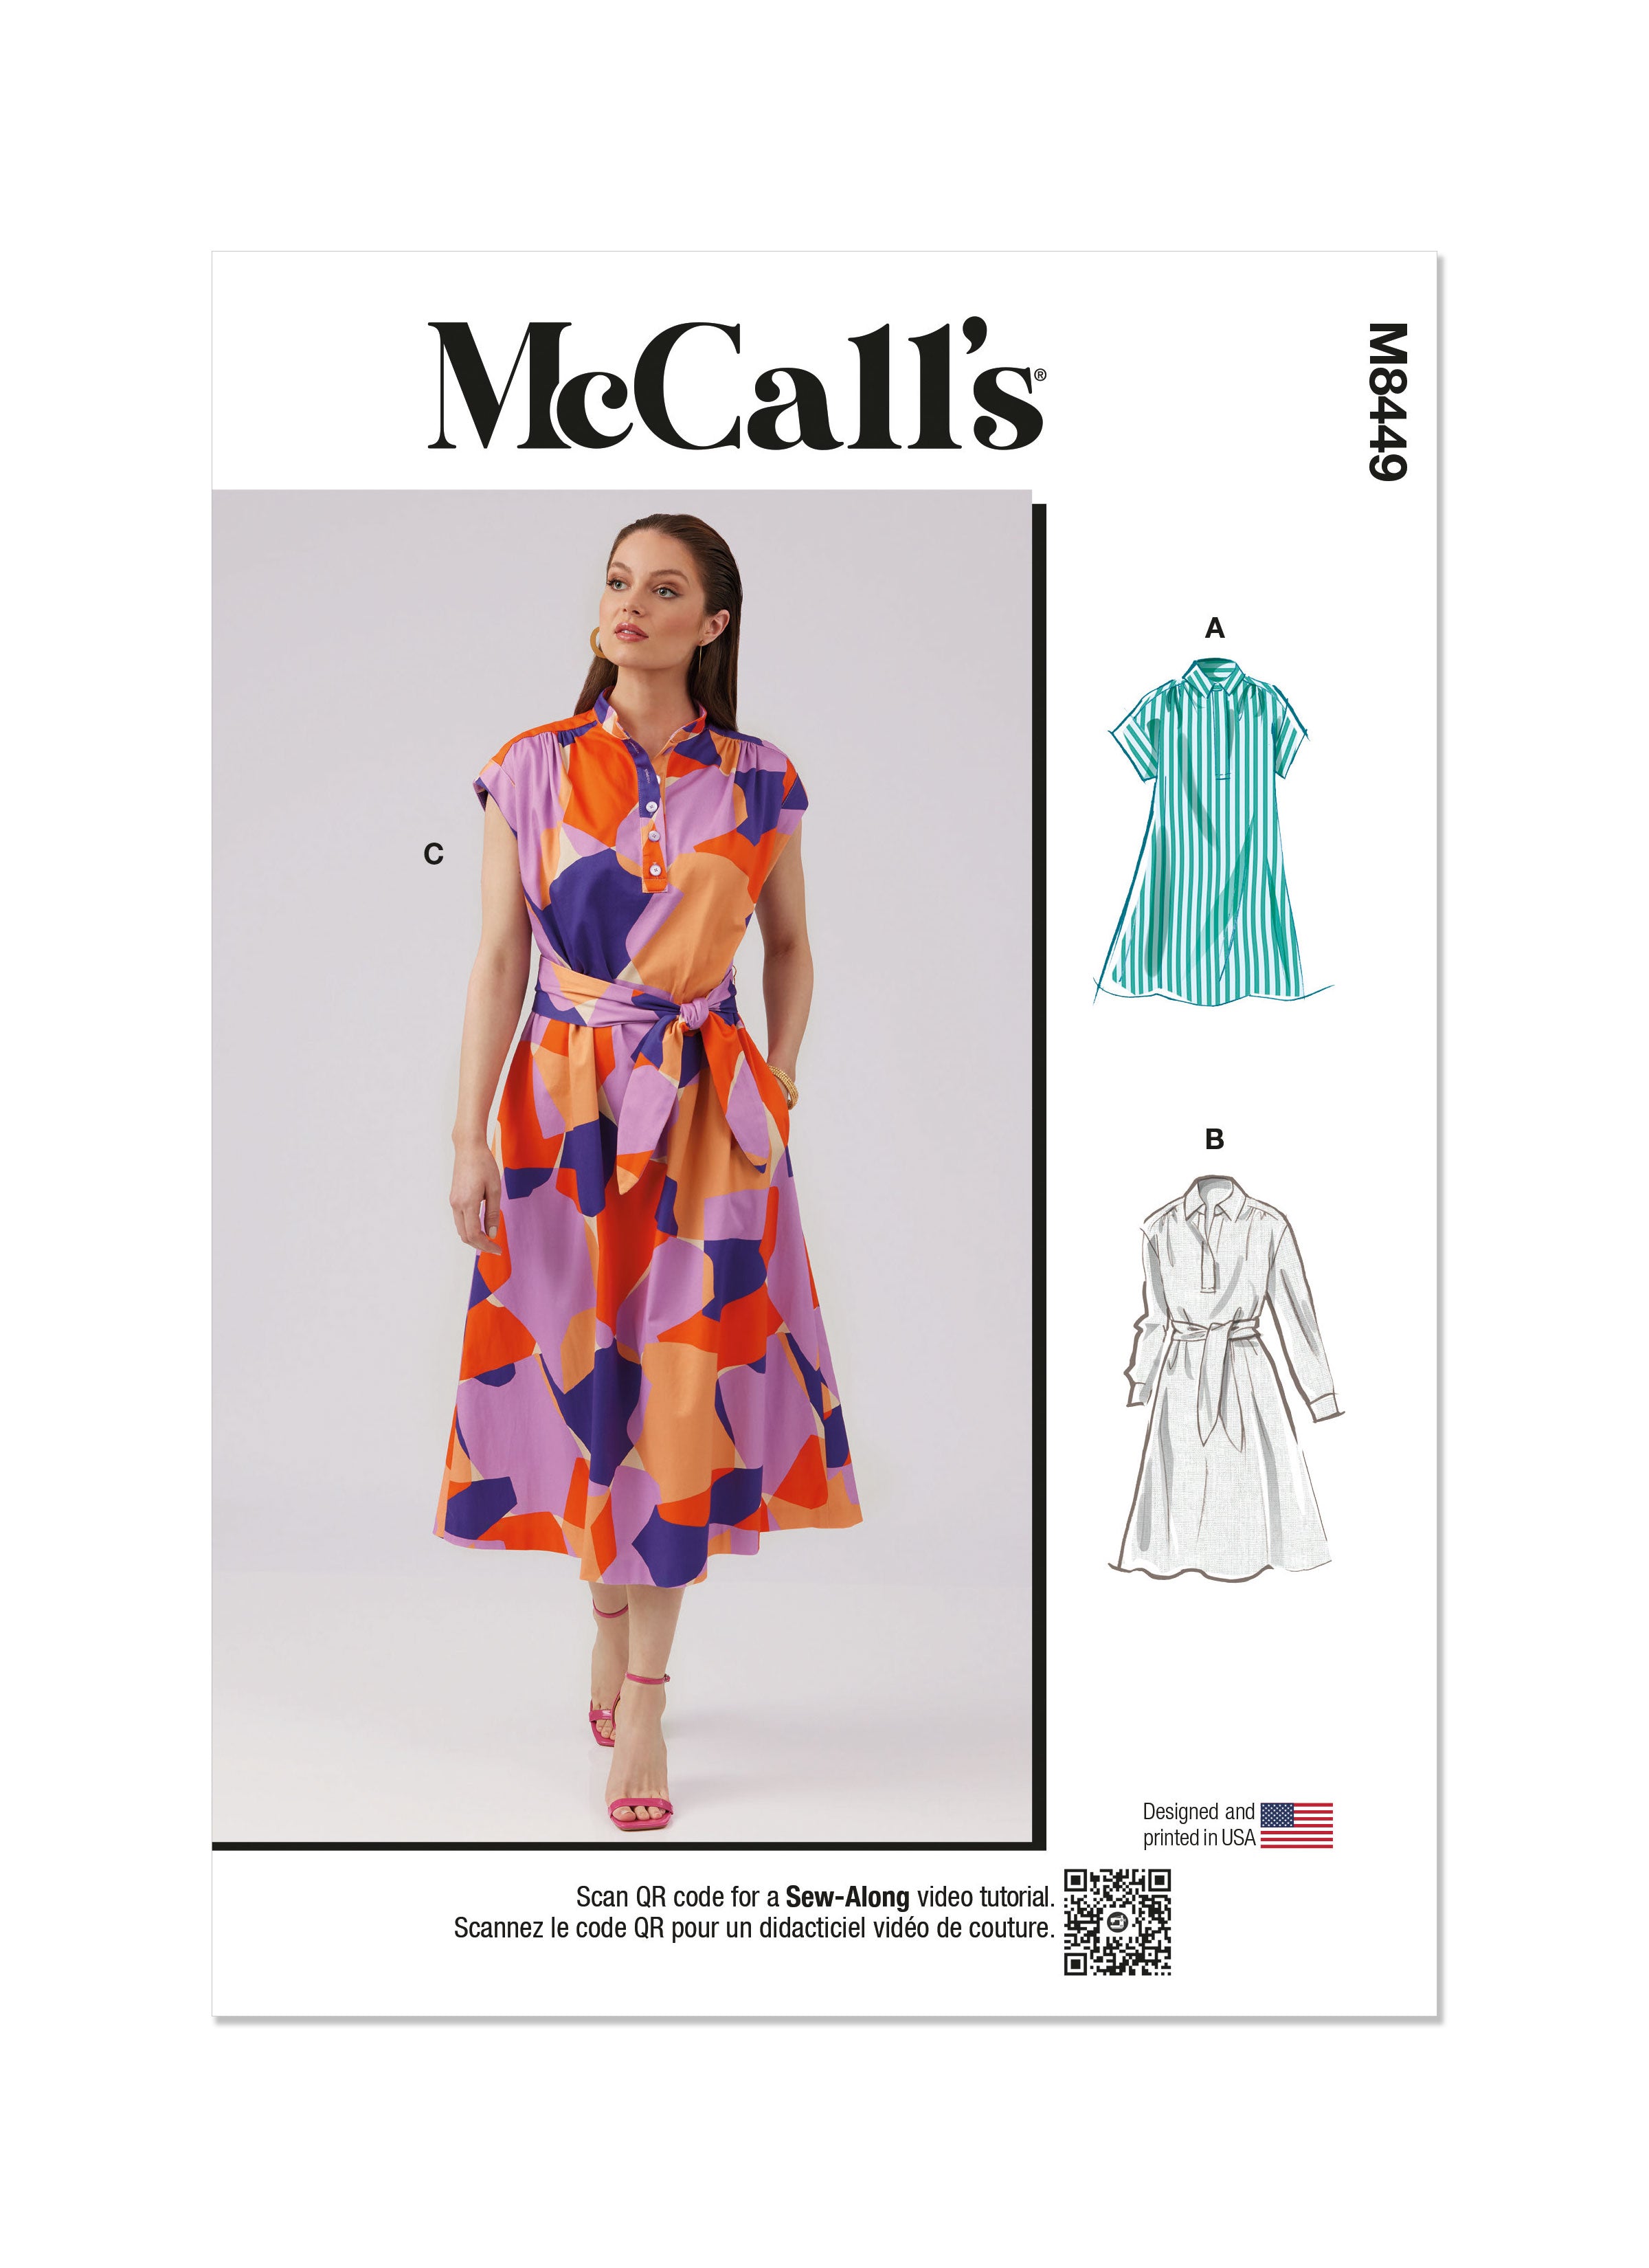 McCall's Sewing Pattern 8449 Dresses and Sash from Jaycotts Sewing Supplies